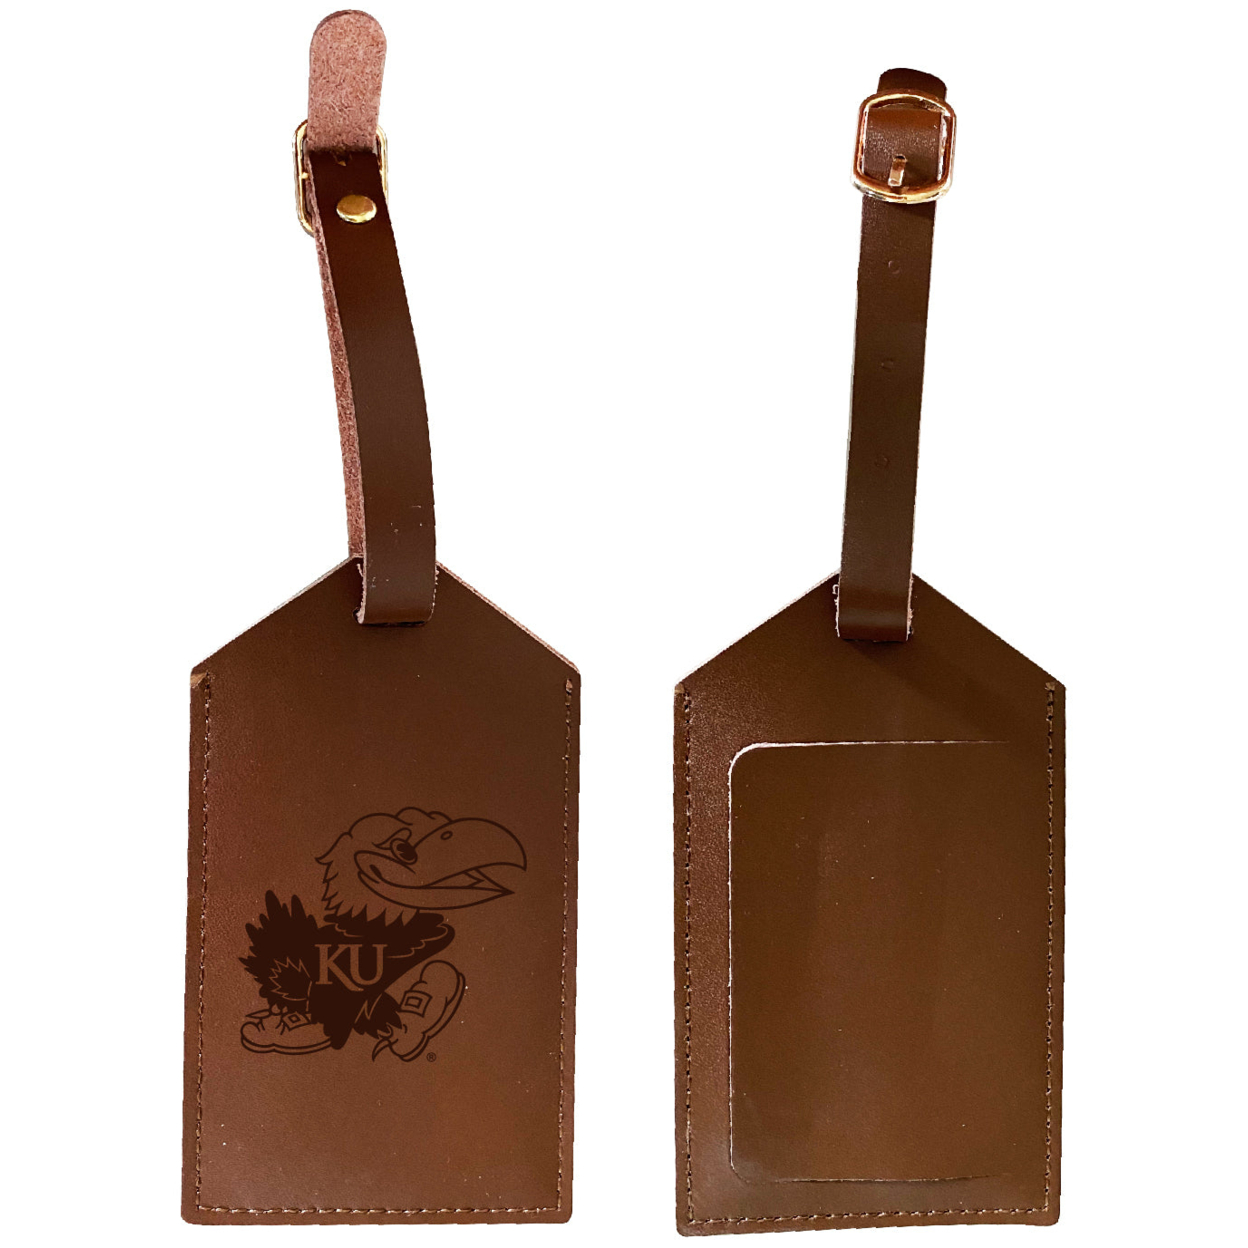 Kentucky Wildcats Leather Luggage Tag Engraved